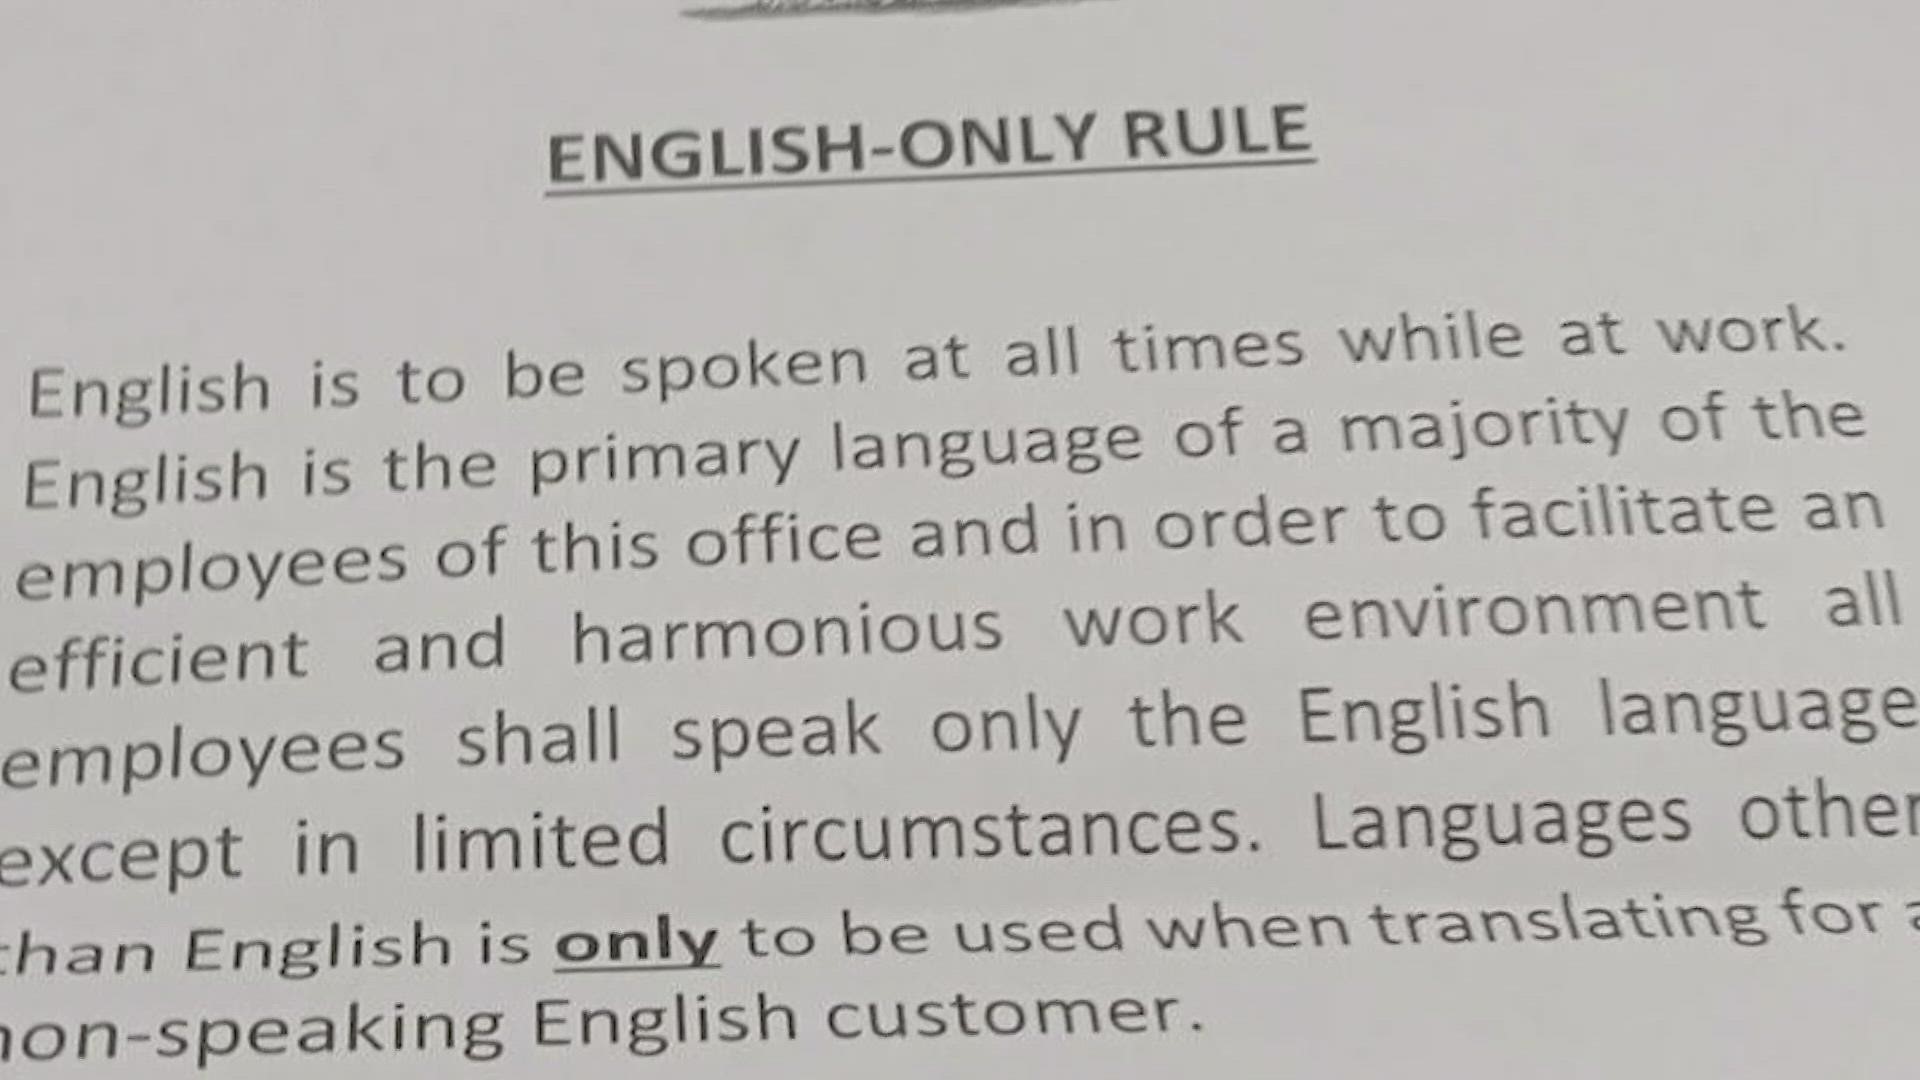 She says the English-only rule came after complaints from other coworkers.